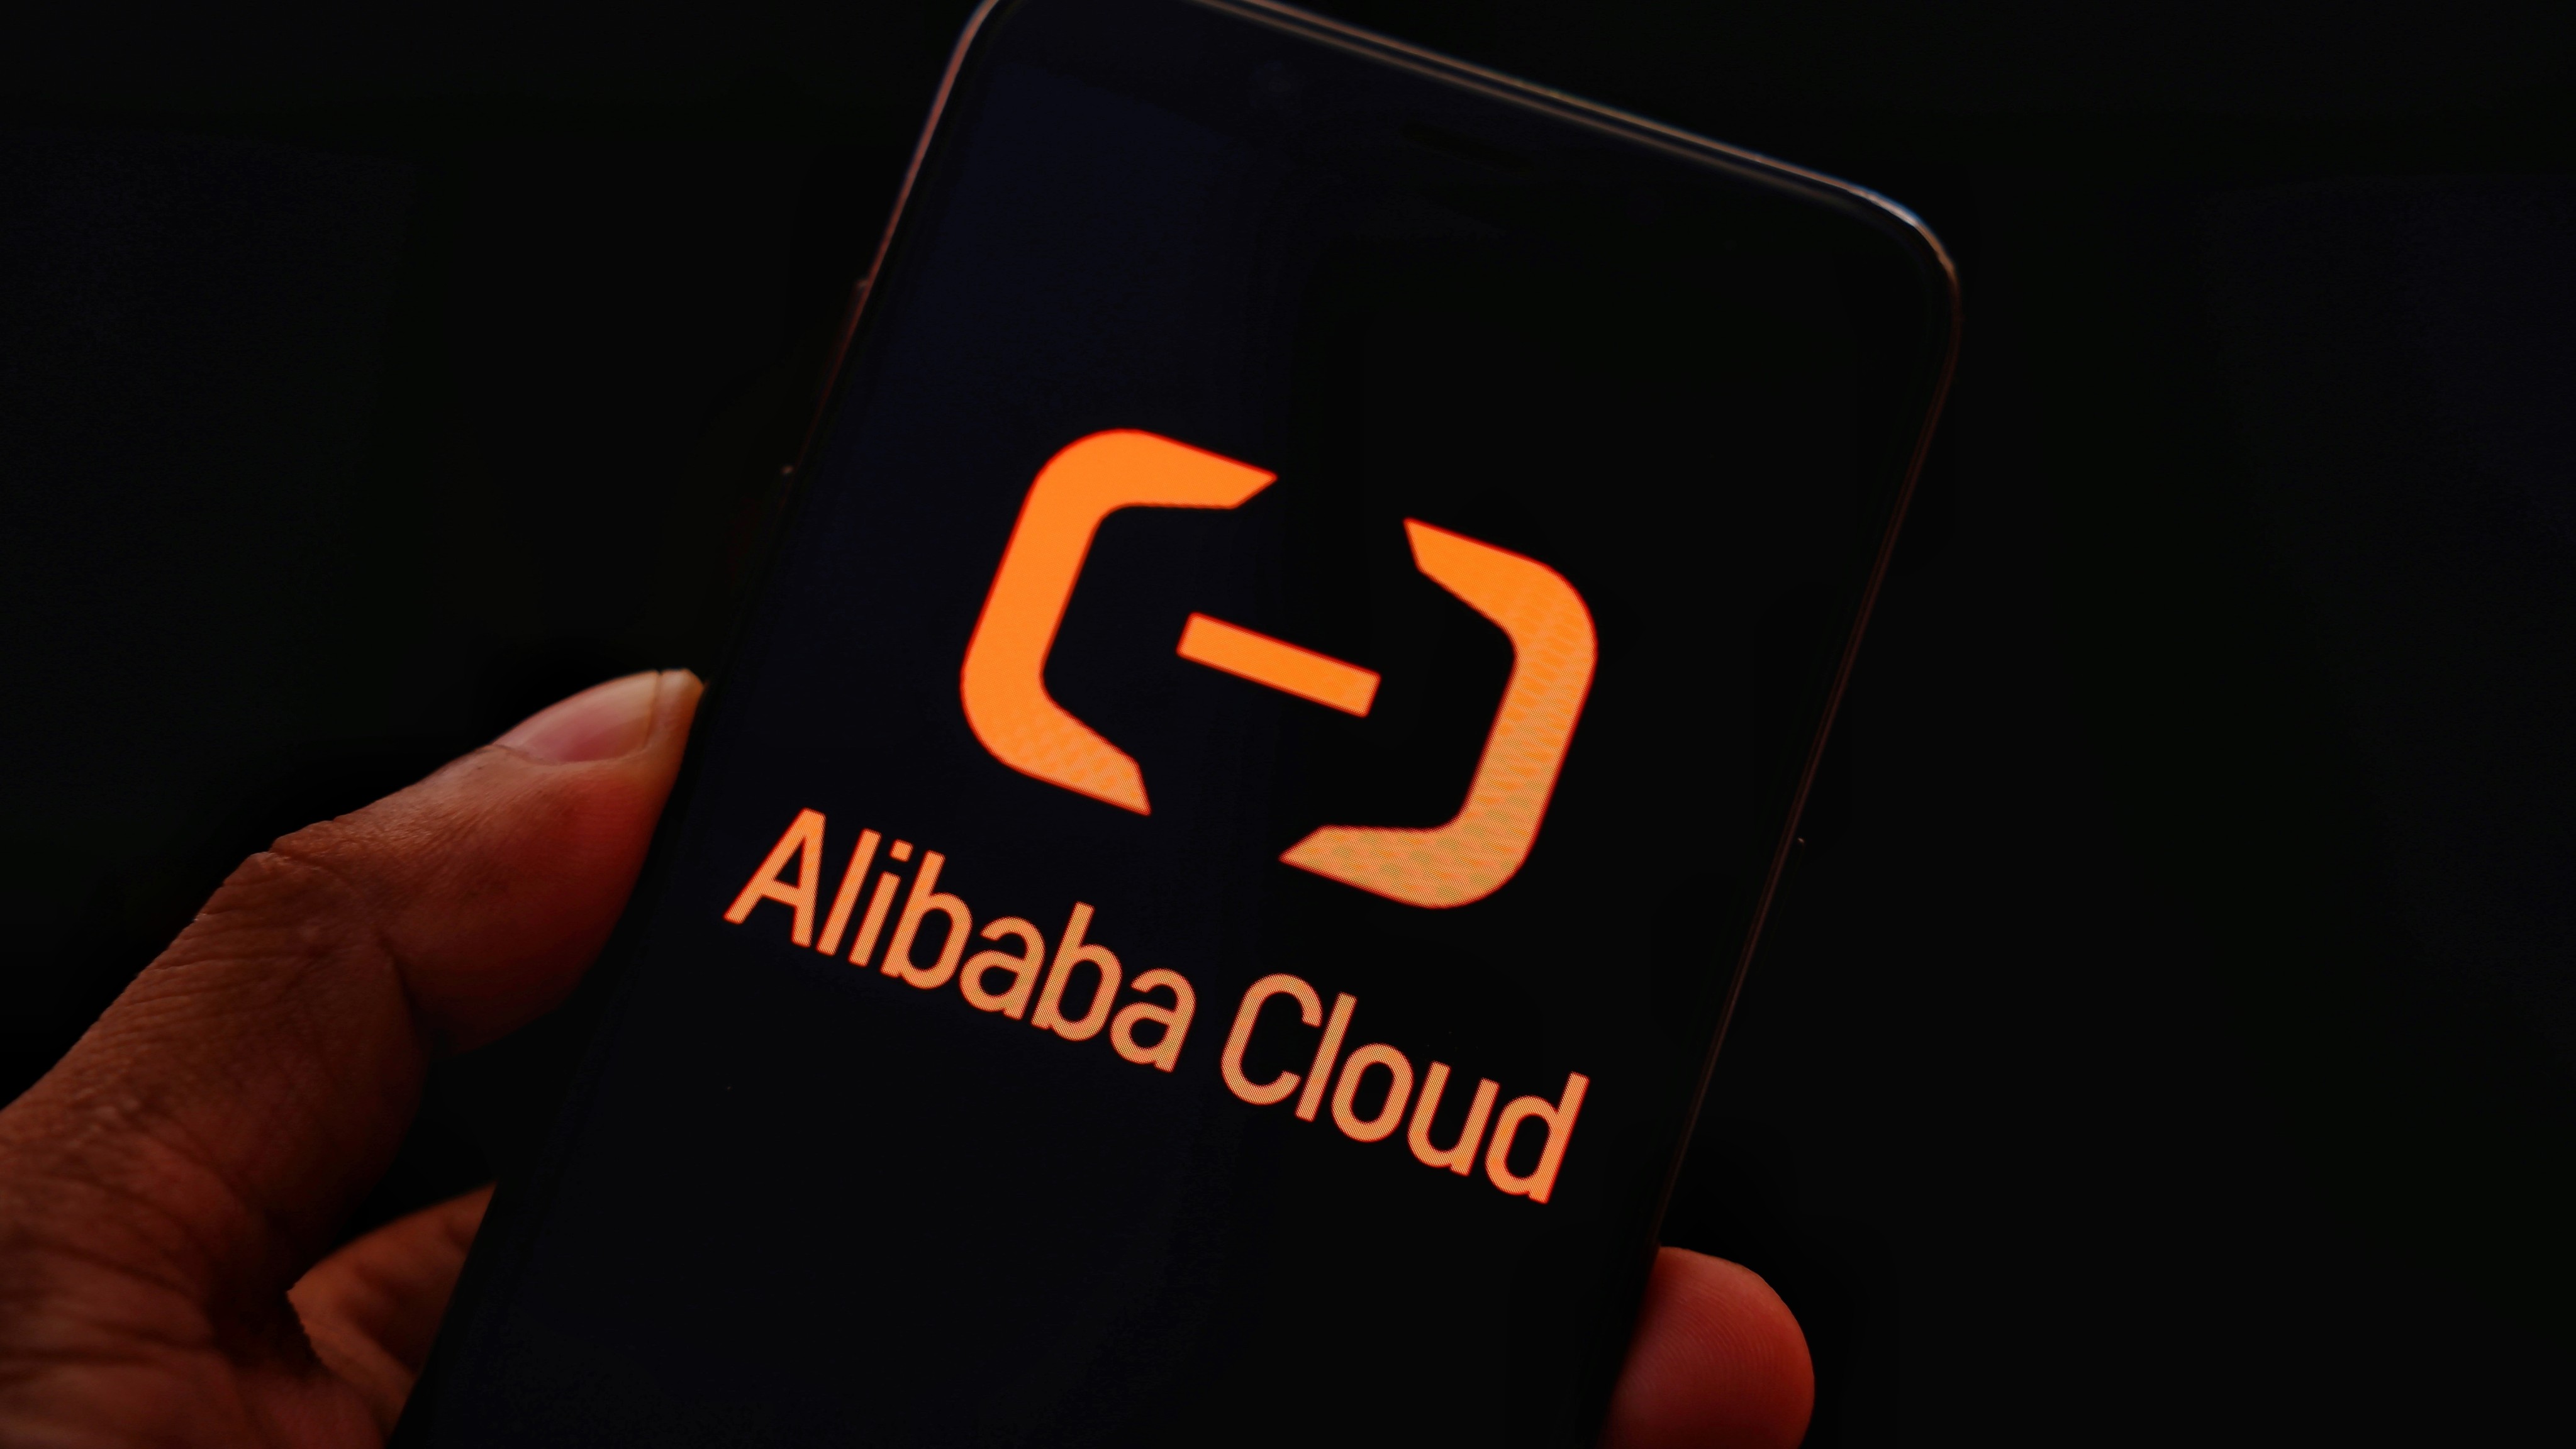 Alibaba Cloud has pledged to compensate the companies affected by the recent system failure based on their service agreements. Photo: Shutterstock Images